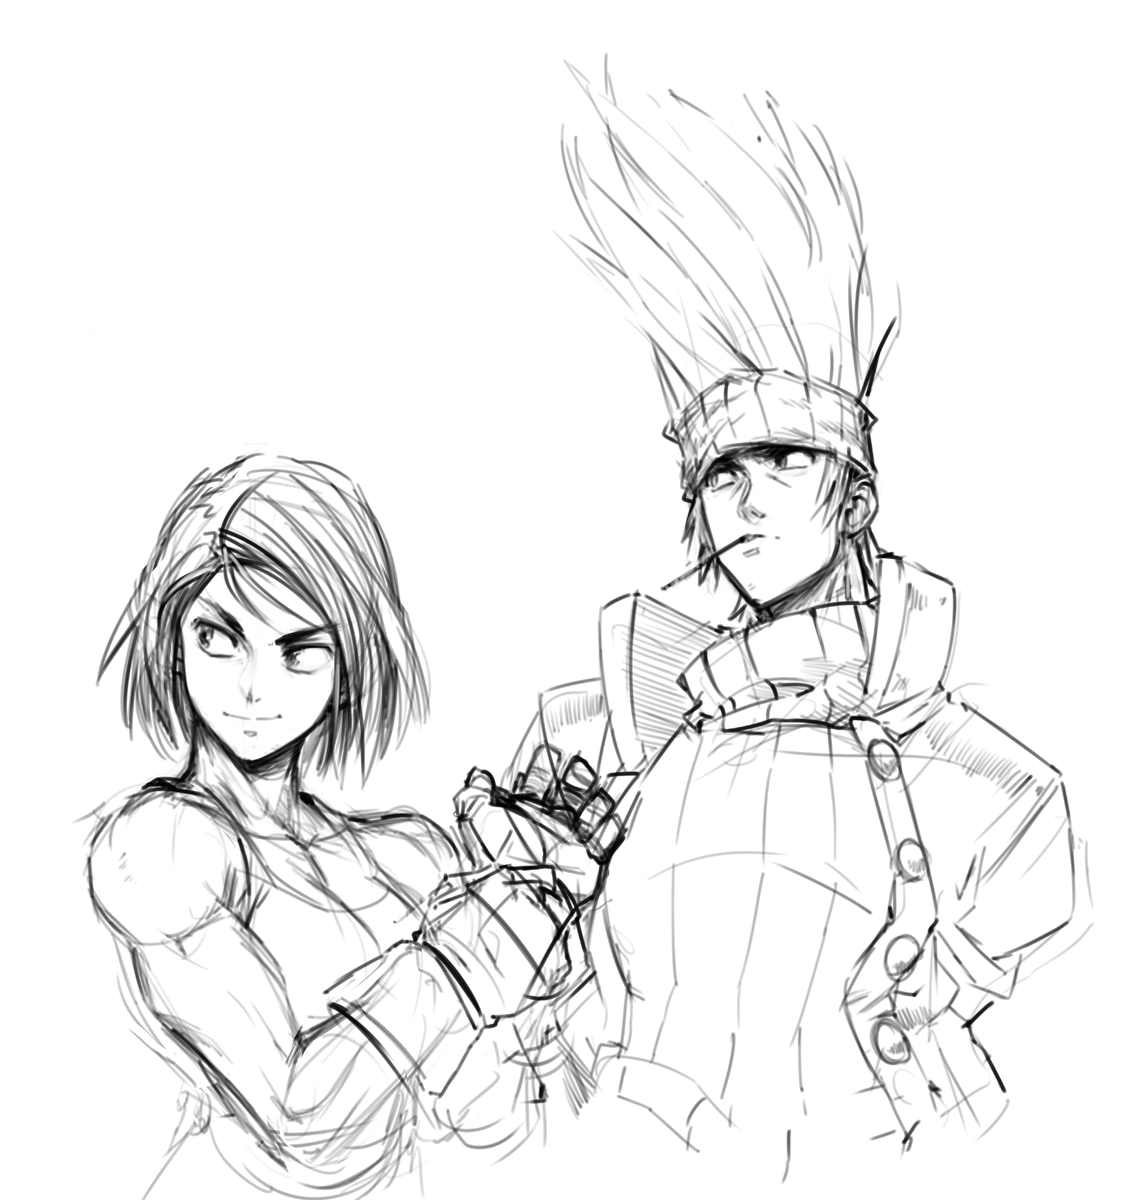 Took a break to sketch some of my favorite delinquents. I wanna add in more bc AHHH #RivalSchools 🔥🔥🔥

#Capcom #Akira 